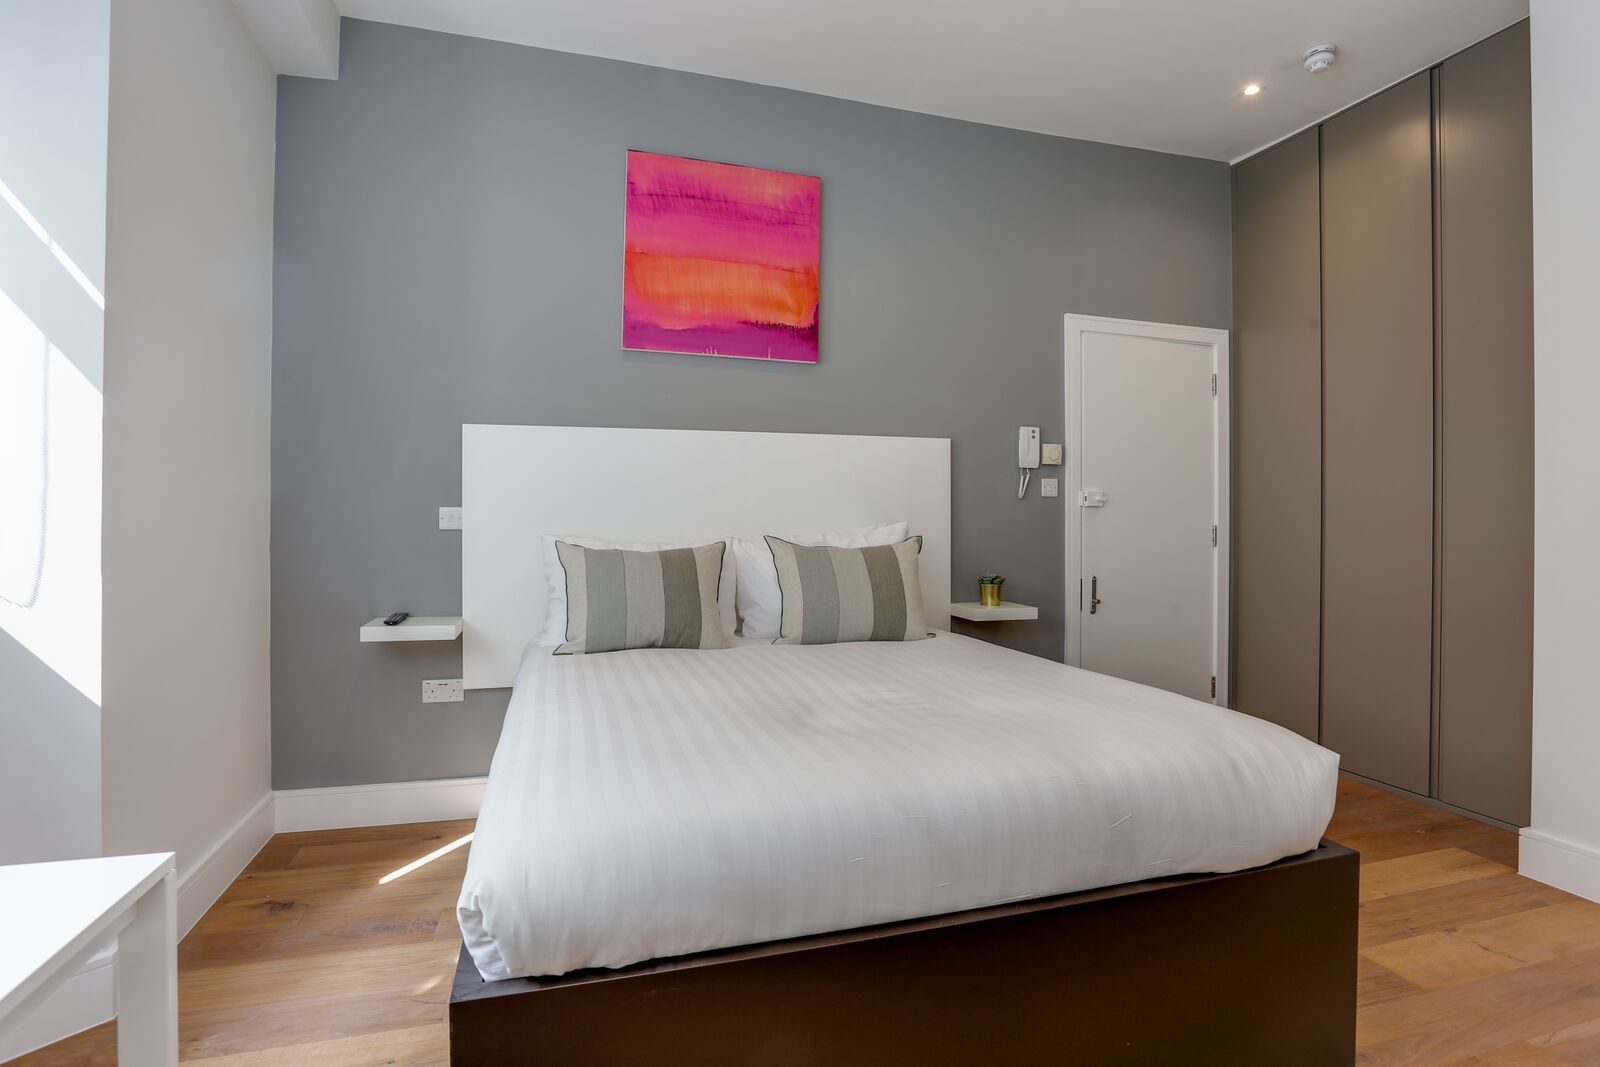 Serviced-Apartments-Queensborough-bordering-Hyde-Park-provides-contemporary-formed-studios--Fully-Furnished,-Wi-Fi,-Extra-Amenities-and-Luggage-Storage!